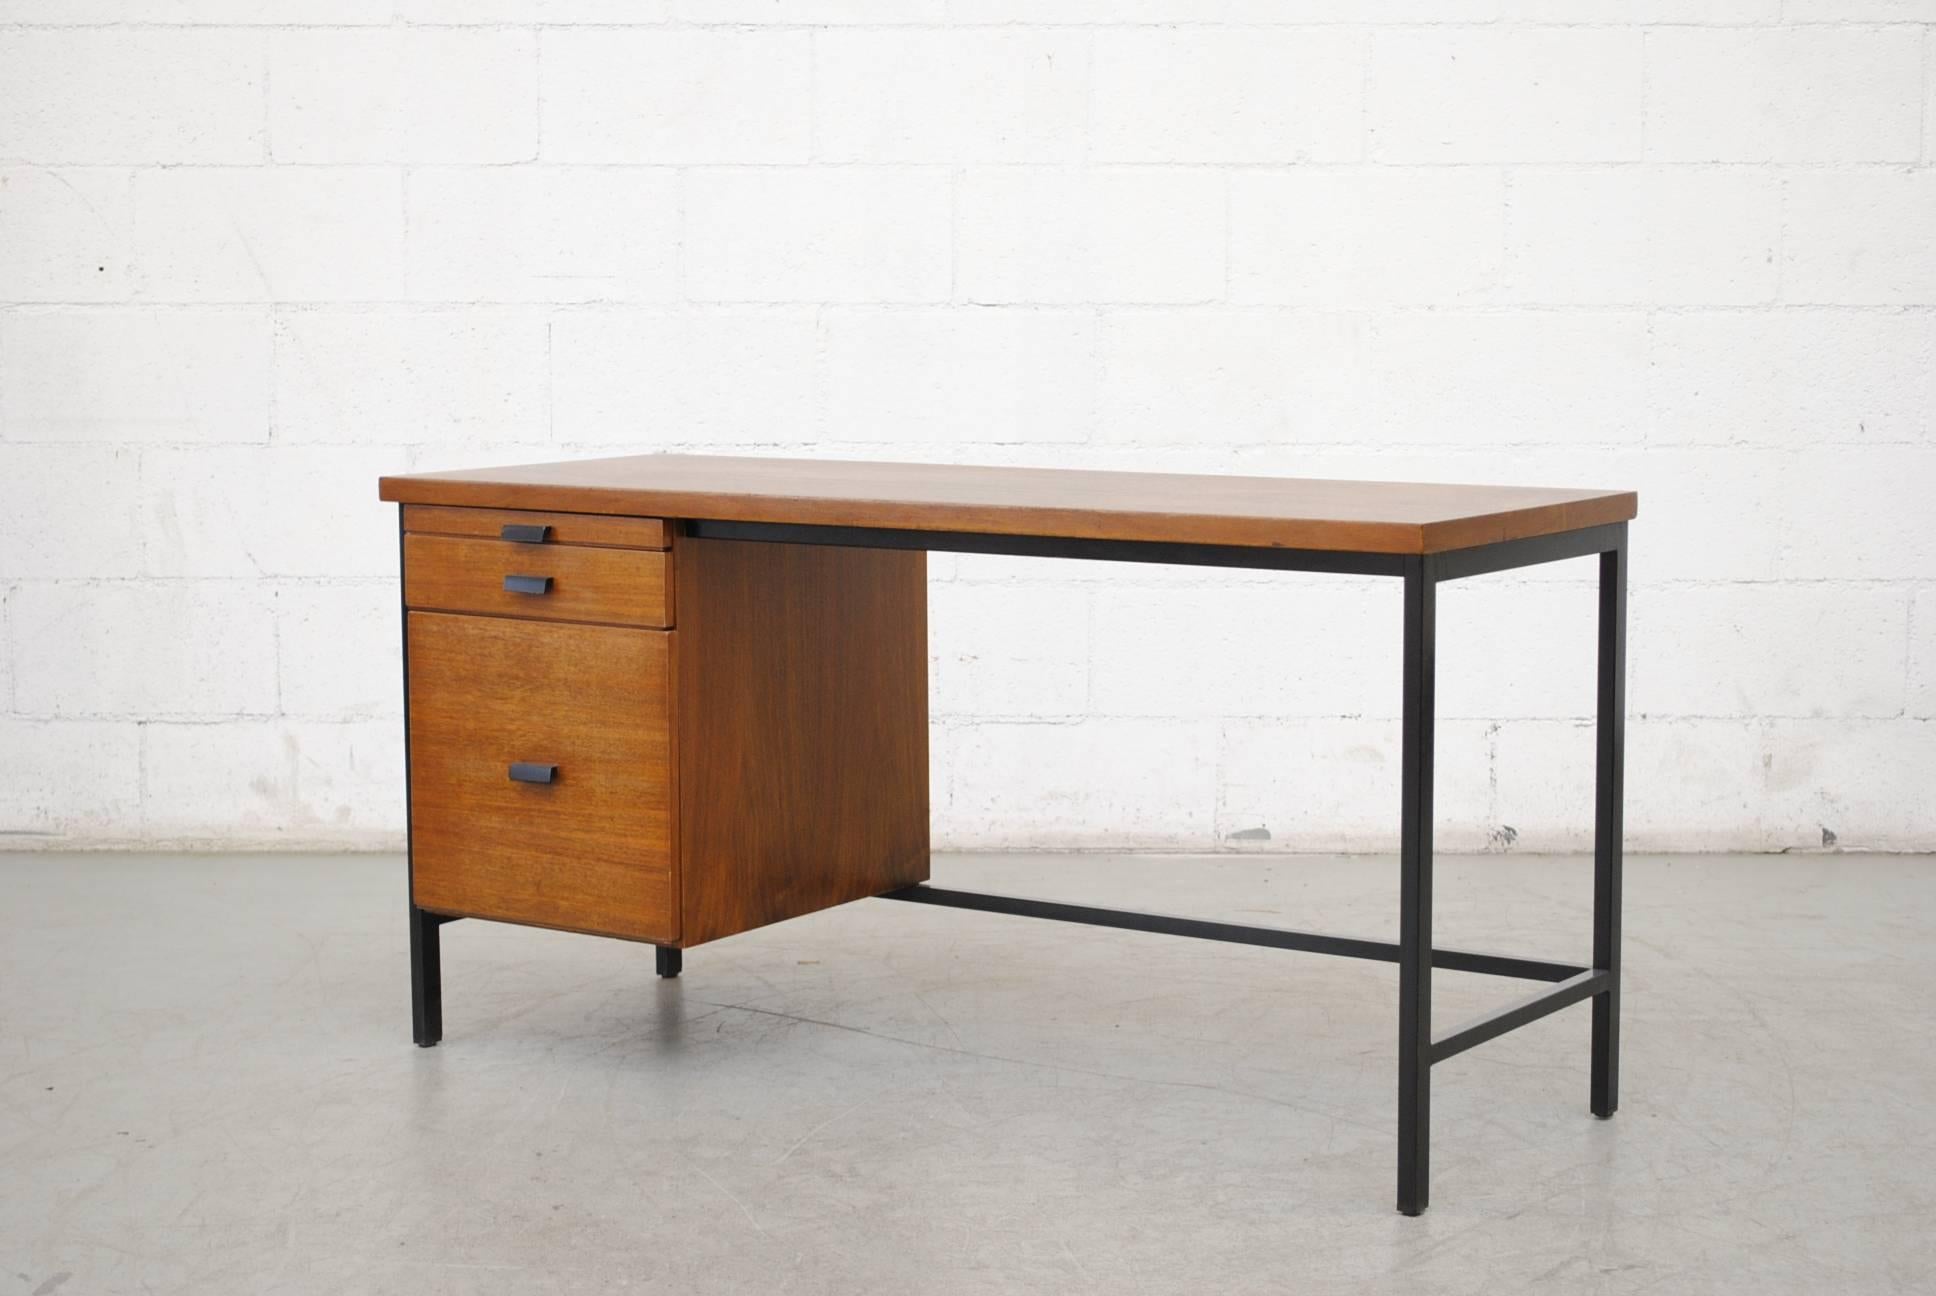 Midcentury Pierre Paulin inspired writing desk. Lightly refinished teak with black enameled metal frames and hand pulls. Super cool pullout filing cabinet drawer, organizer top drawer, and two sliding drawers. Original condition with visible wear.